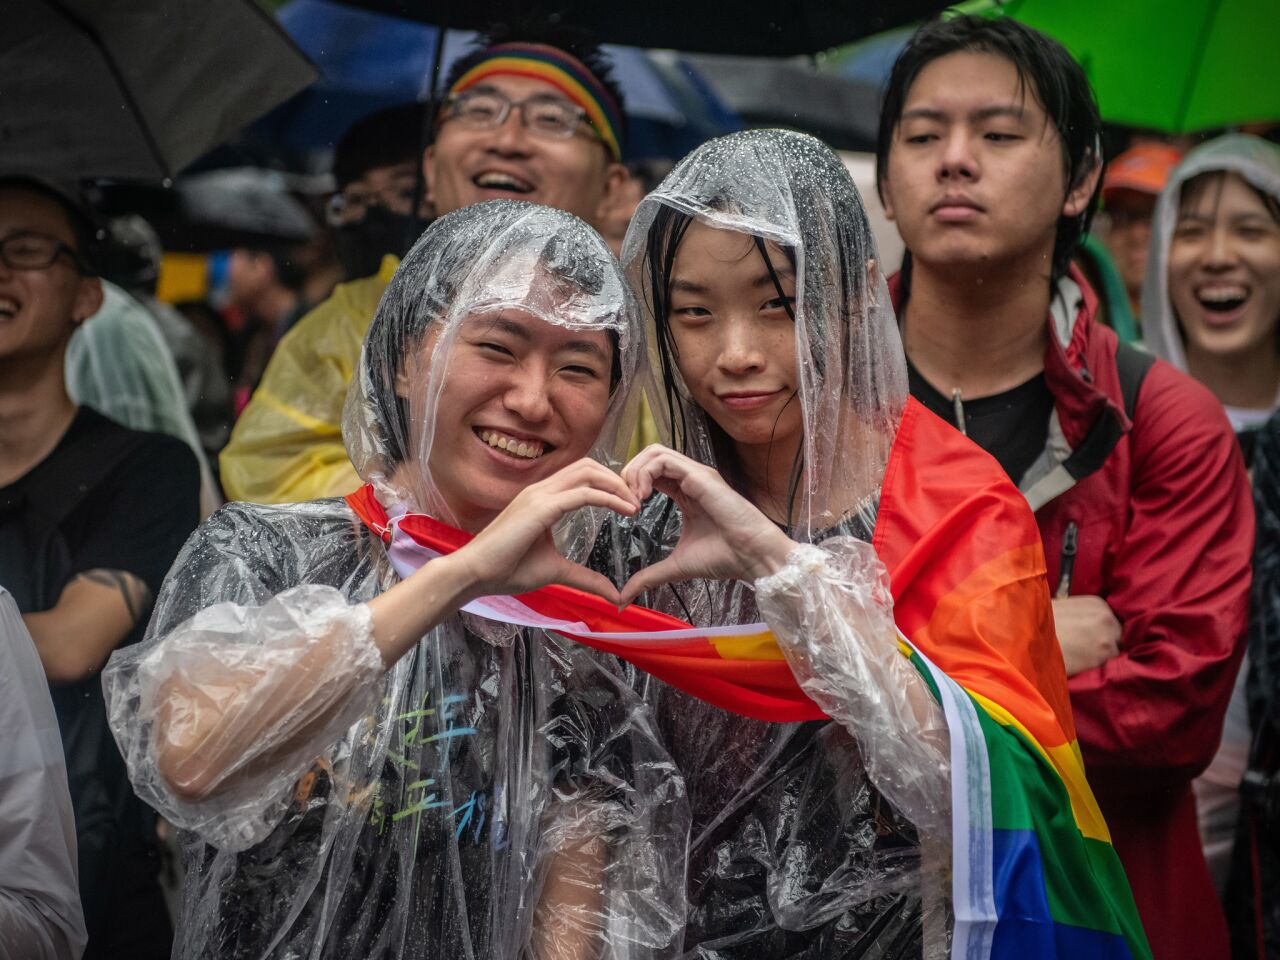 Women in Taipei form a heart with their hands after Taiwan's parliament voted to legalize same-sex marriage.